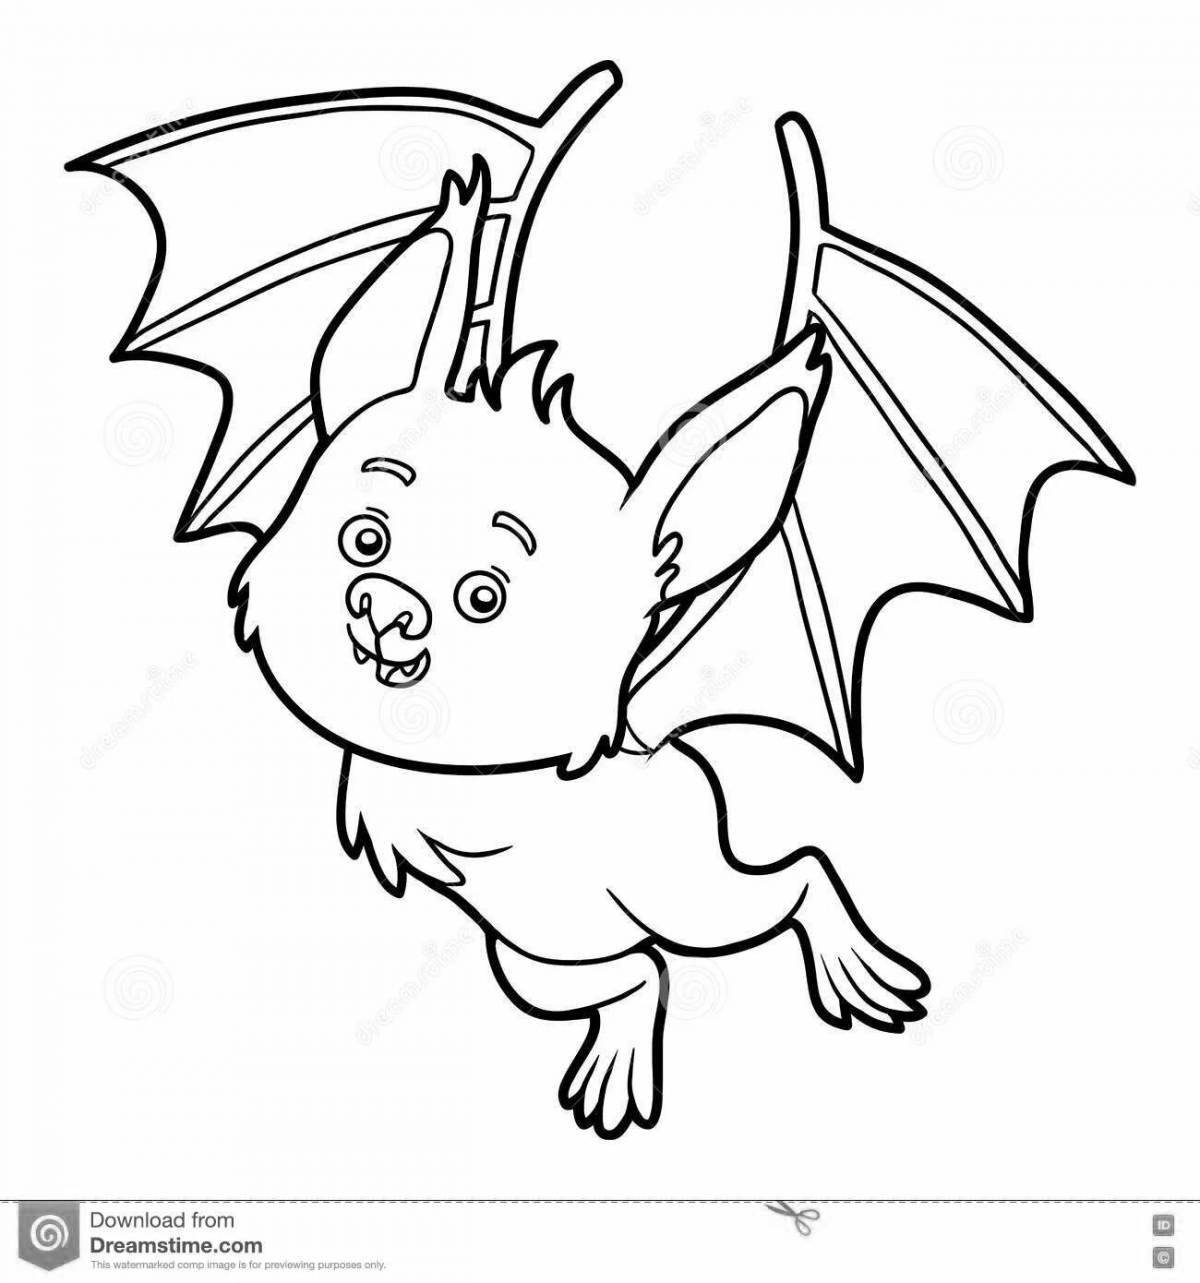 Playful flying mouse coloring page